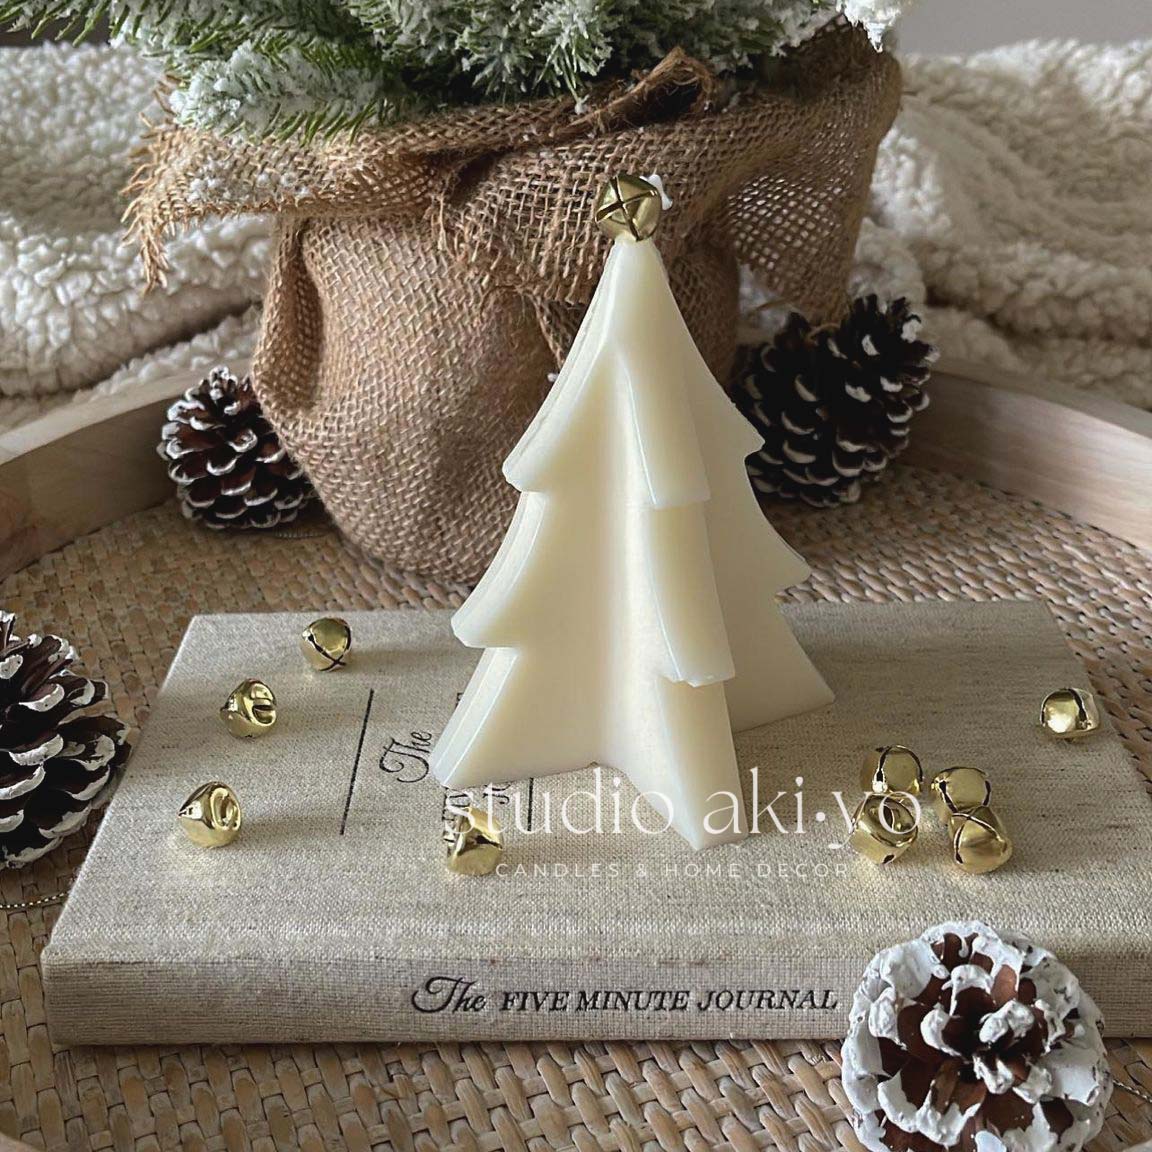 Christmas Large Tree Candle (Limited Edition)